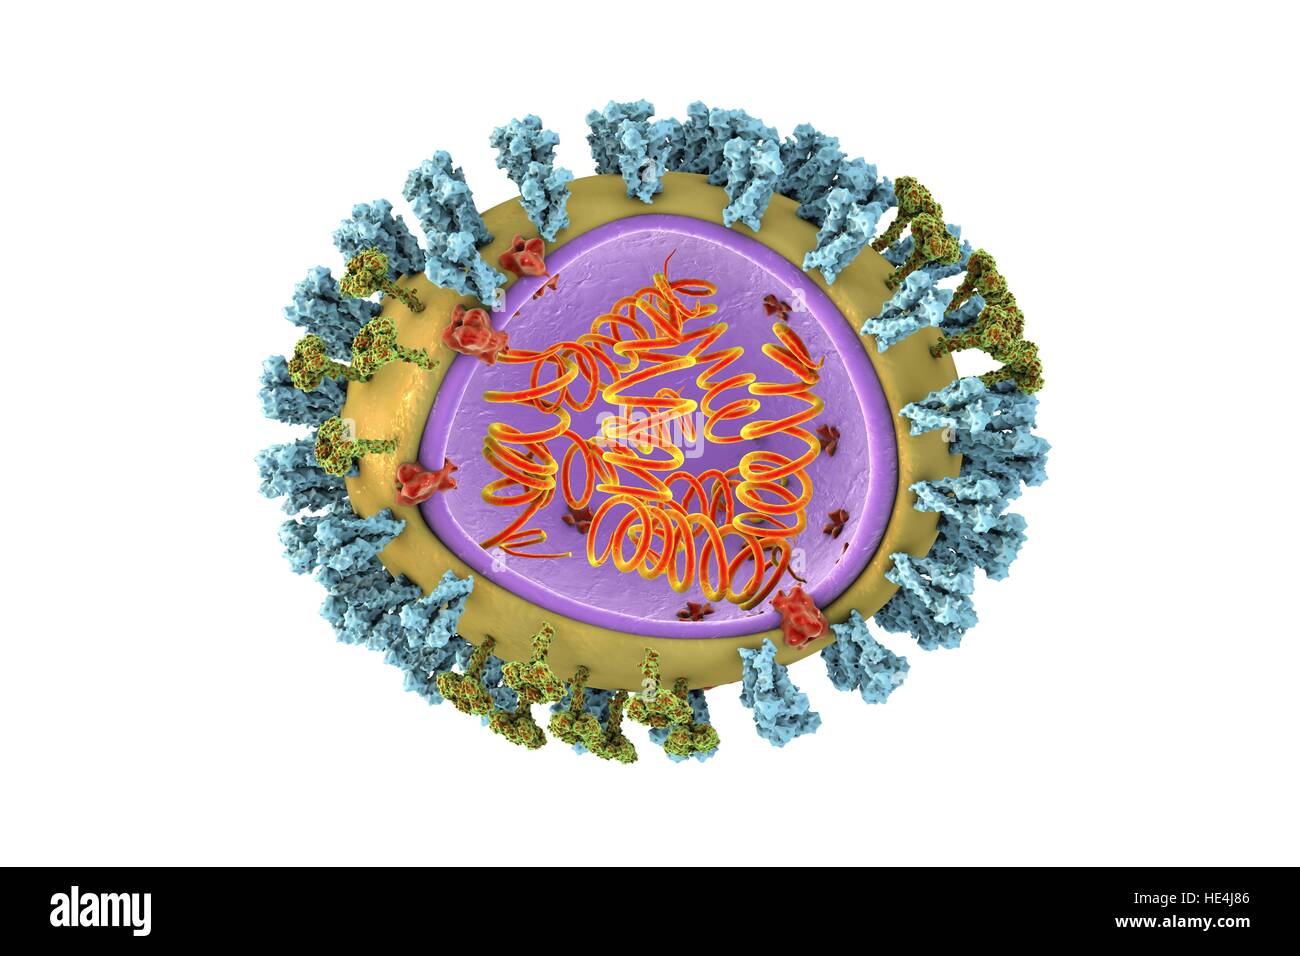 Bird flu virus.3D illustration of avian influenza H5N8 virus particle.The virus consists of ribonucleic acid (RNA,orange coils) core,surrounded by nucleocapsid (purple) lipid envelope (yellow).Spanning capsid envelope are M2 proteins (red),that act as proton pumps.In envelope are two types of Stock Photo